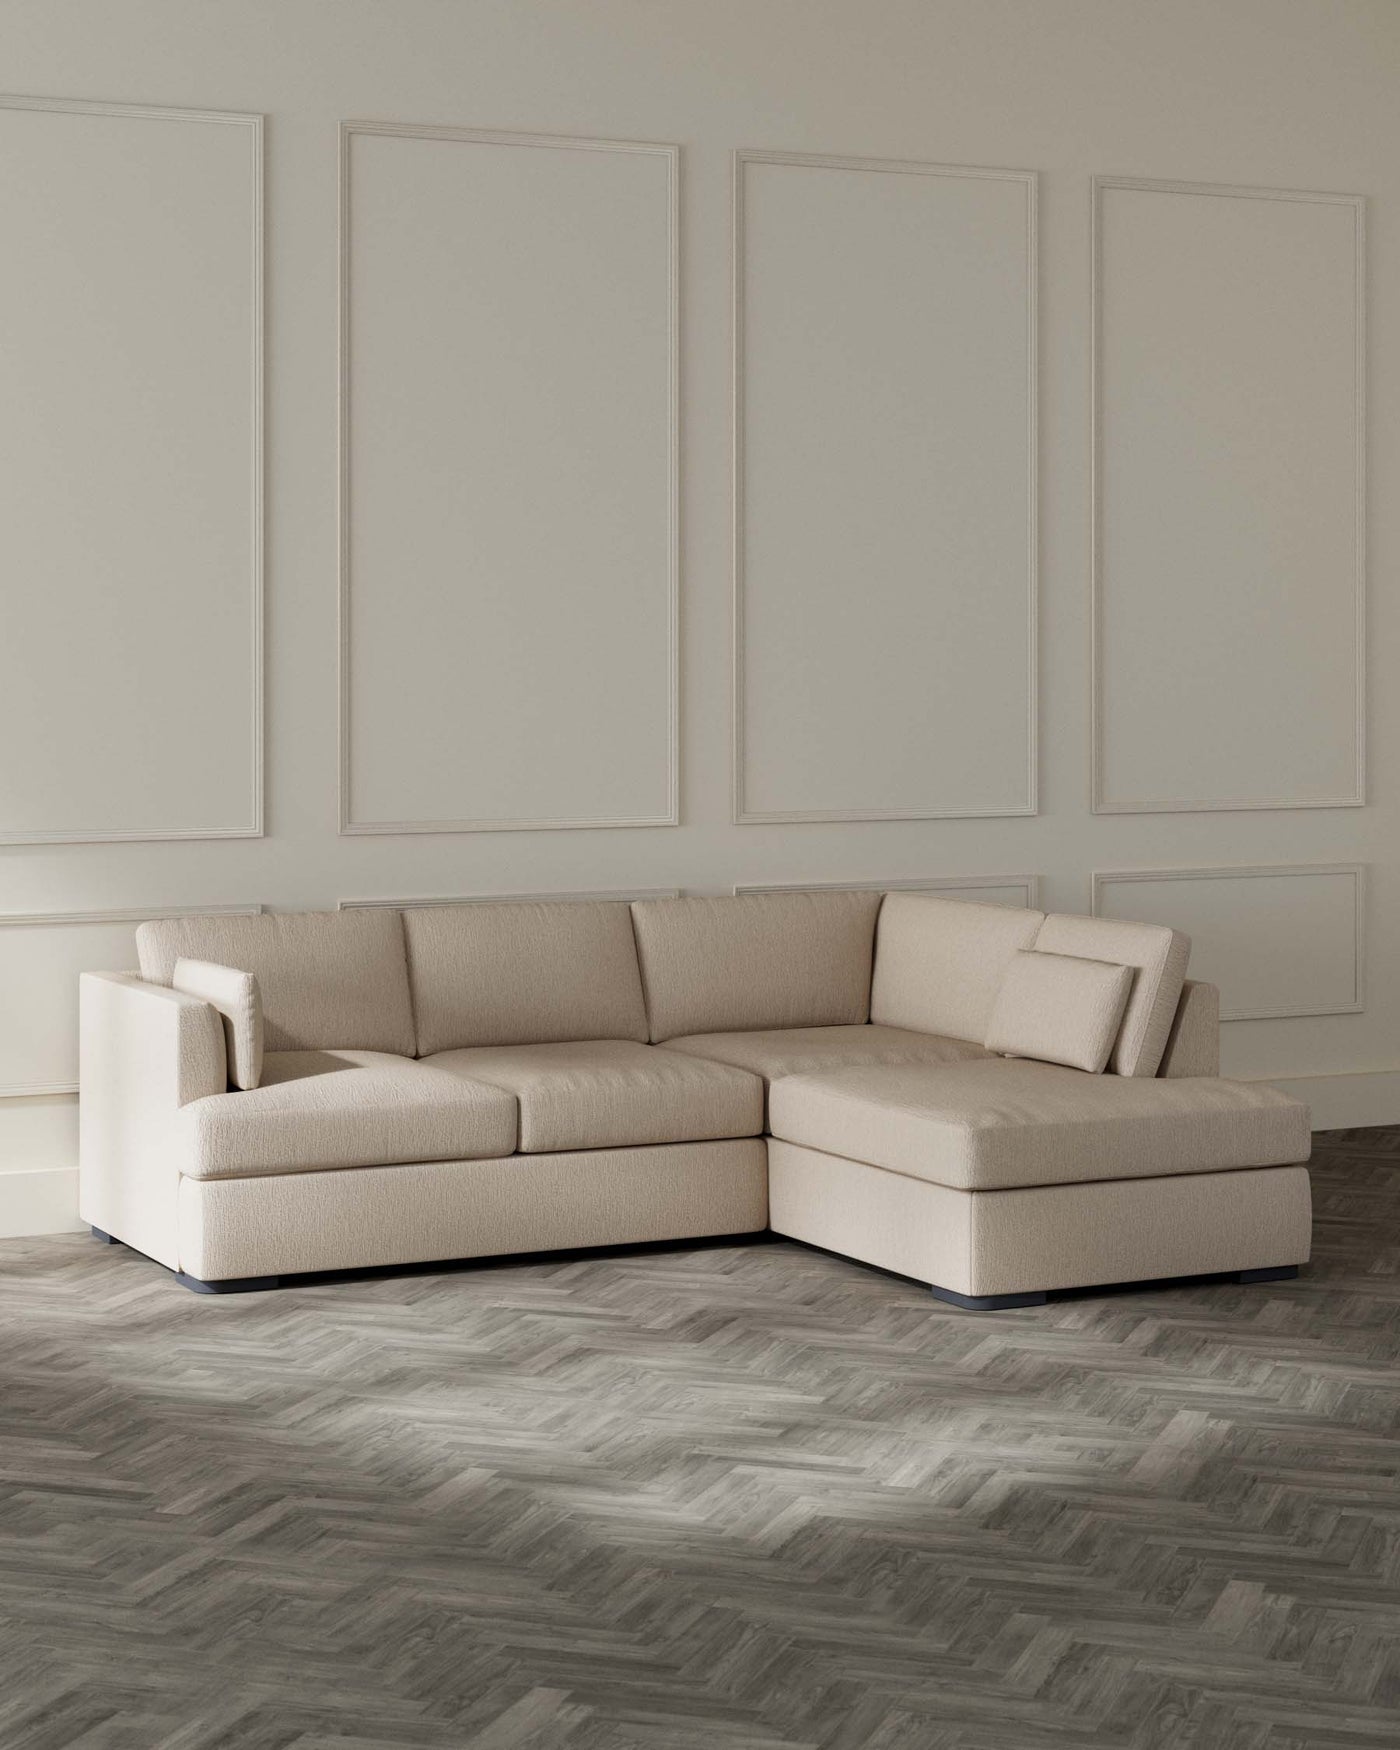 Contemporary L-shaped sectional sofa in a light beige textured fabric with a chaise lounge on the right side. The sofa has a low-profile design with clean lines, thick cushioned seating, and uniform backrests, elevated slightly off the floor with discreet dark legs. The setting is complemented by a herringbone hardwood floor and elegant panelled walls in a neutral tone.